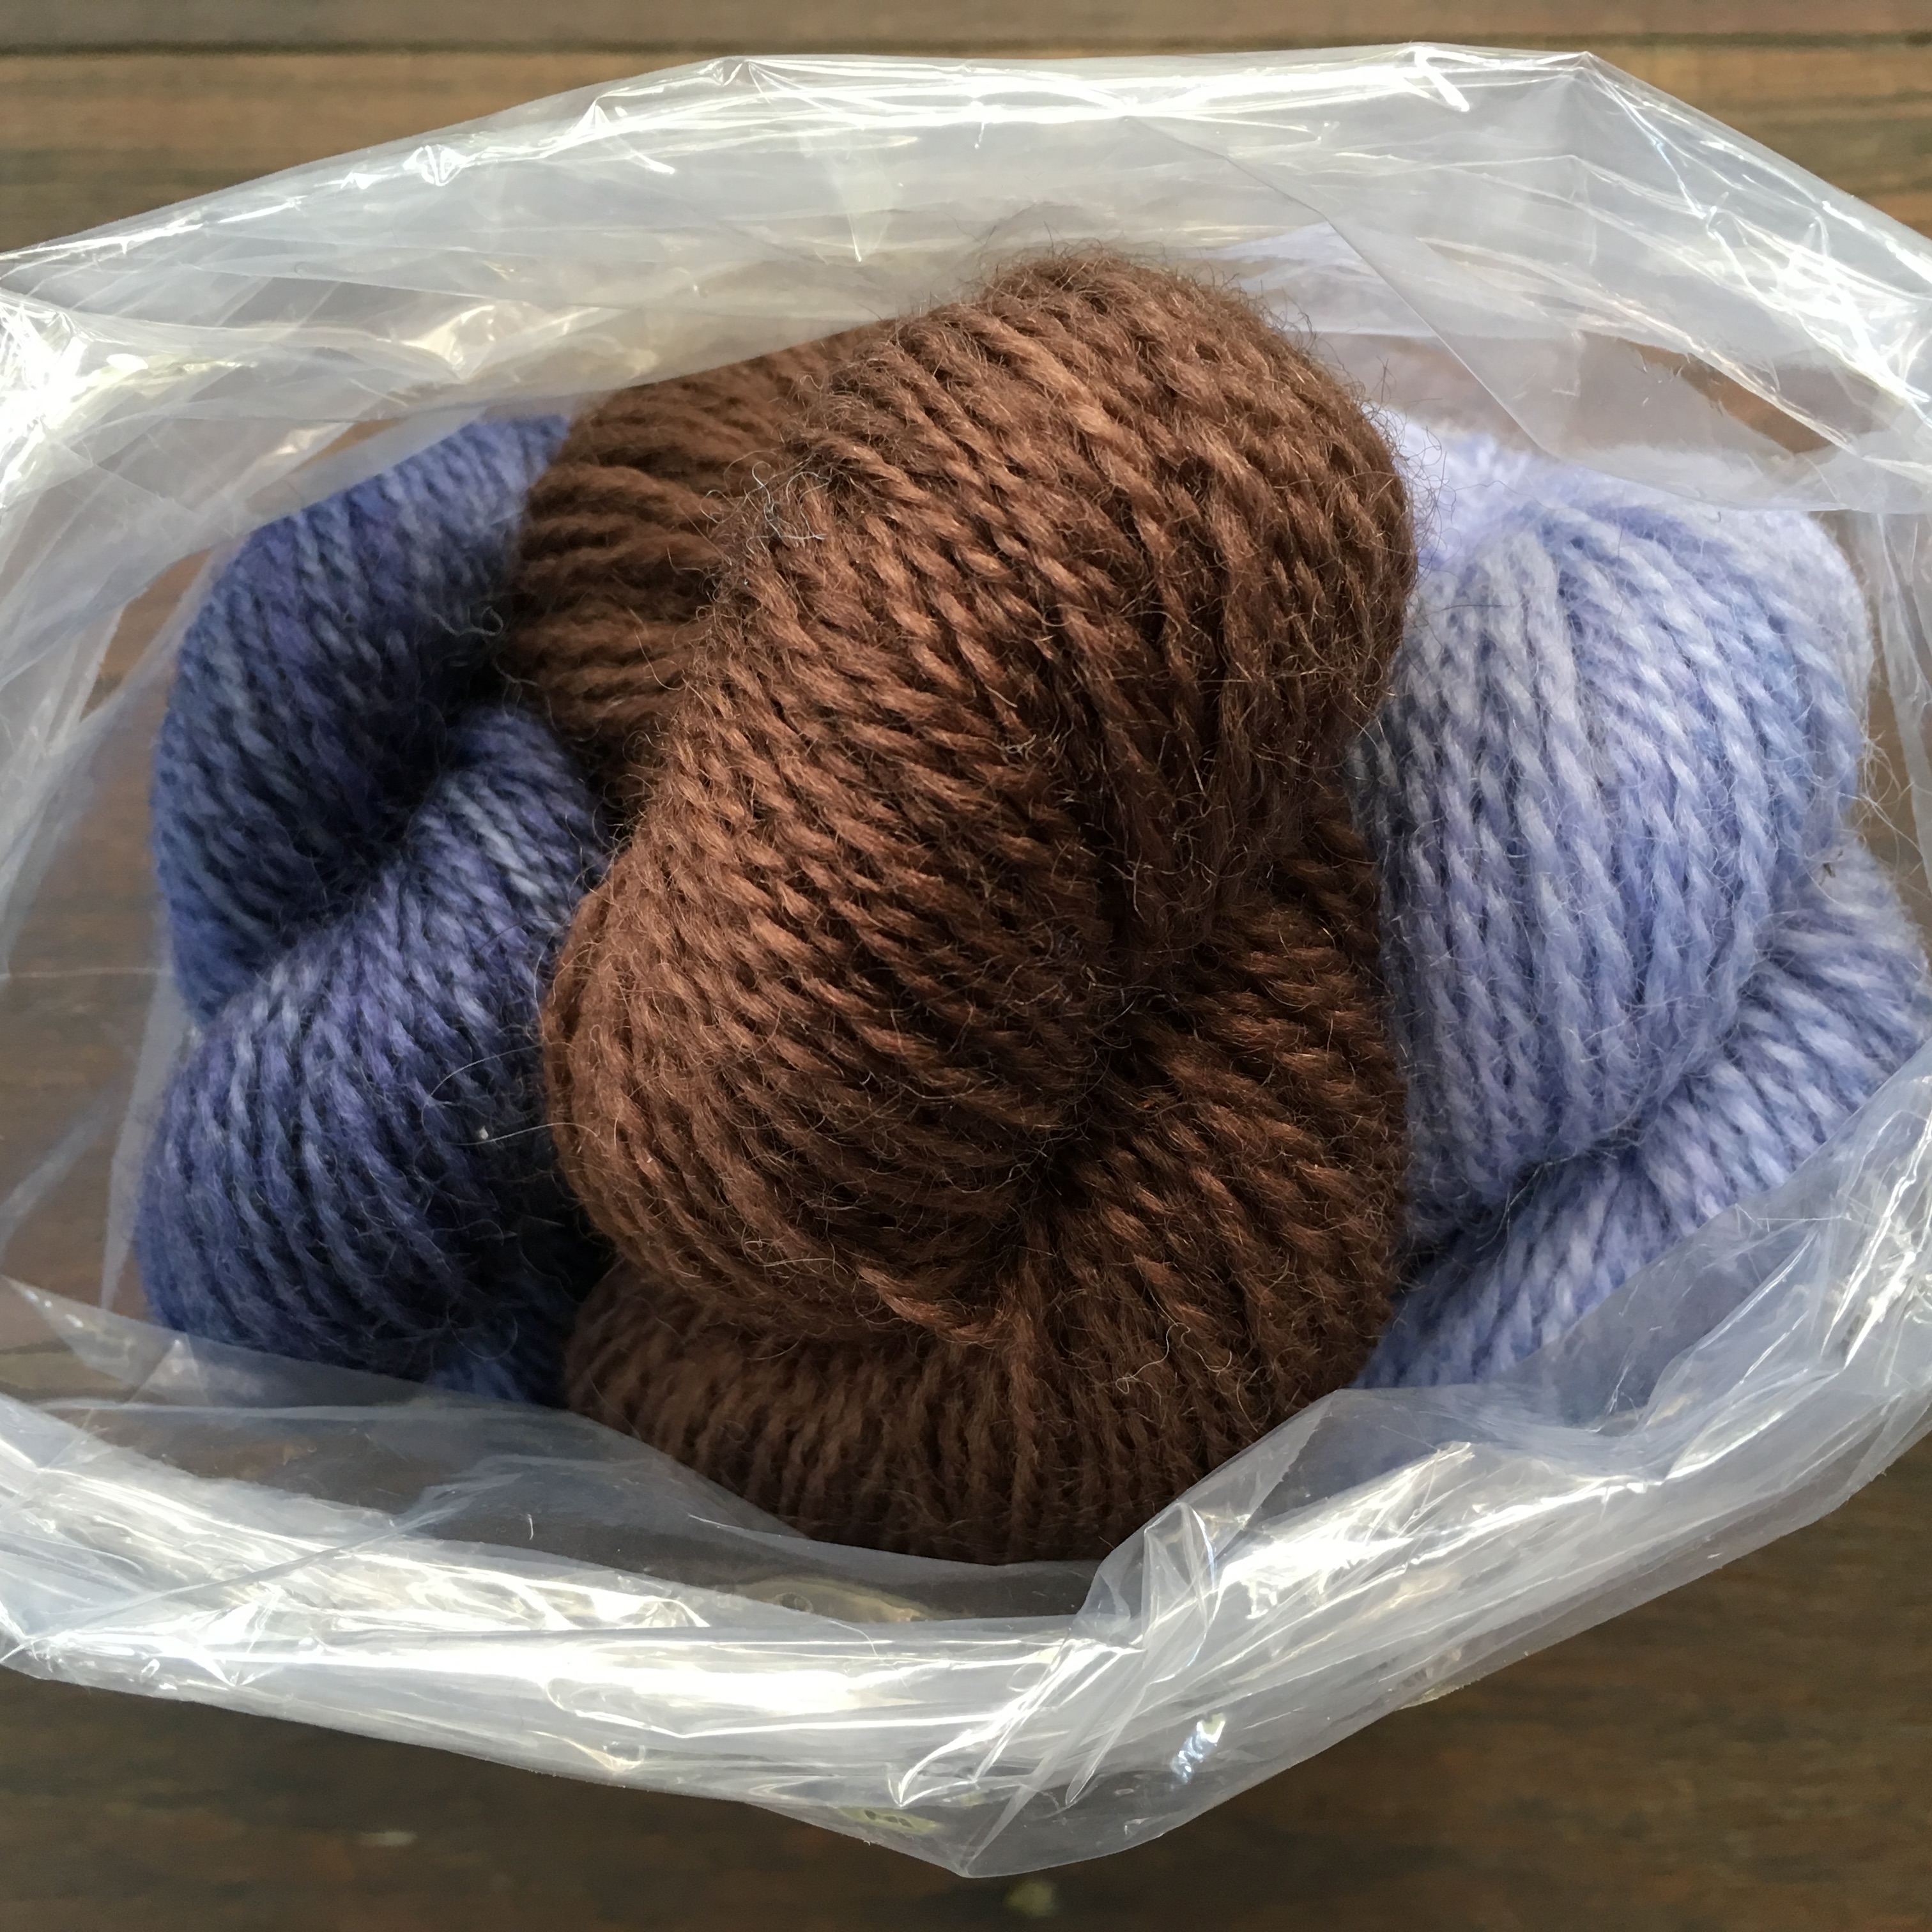 Carole of Foster Sheep Farm put together some great kits for the Bousta Beanie. You'll find her vending at Maryland Sheep and Wool and New Hampshire Sheep and Wool.